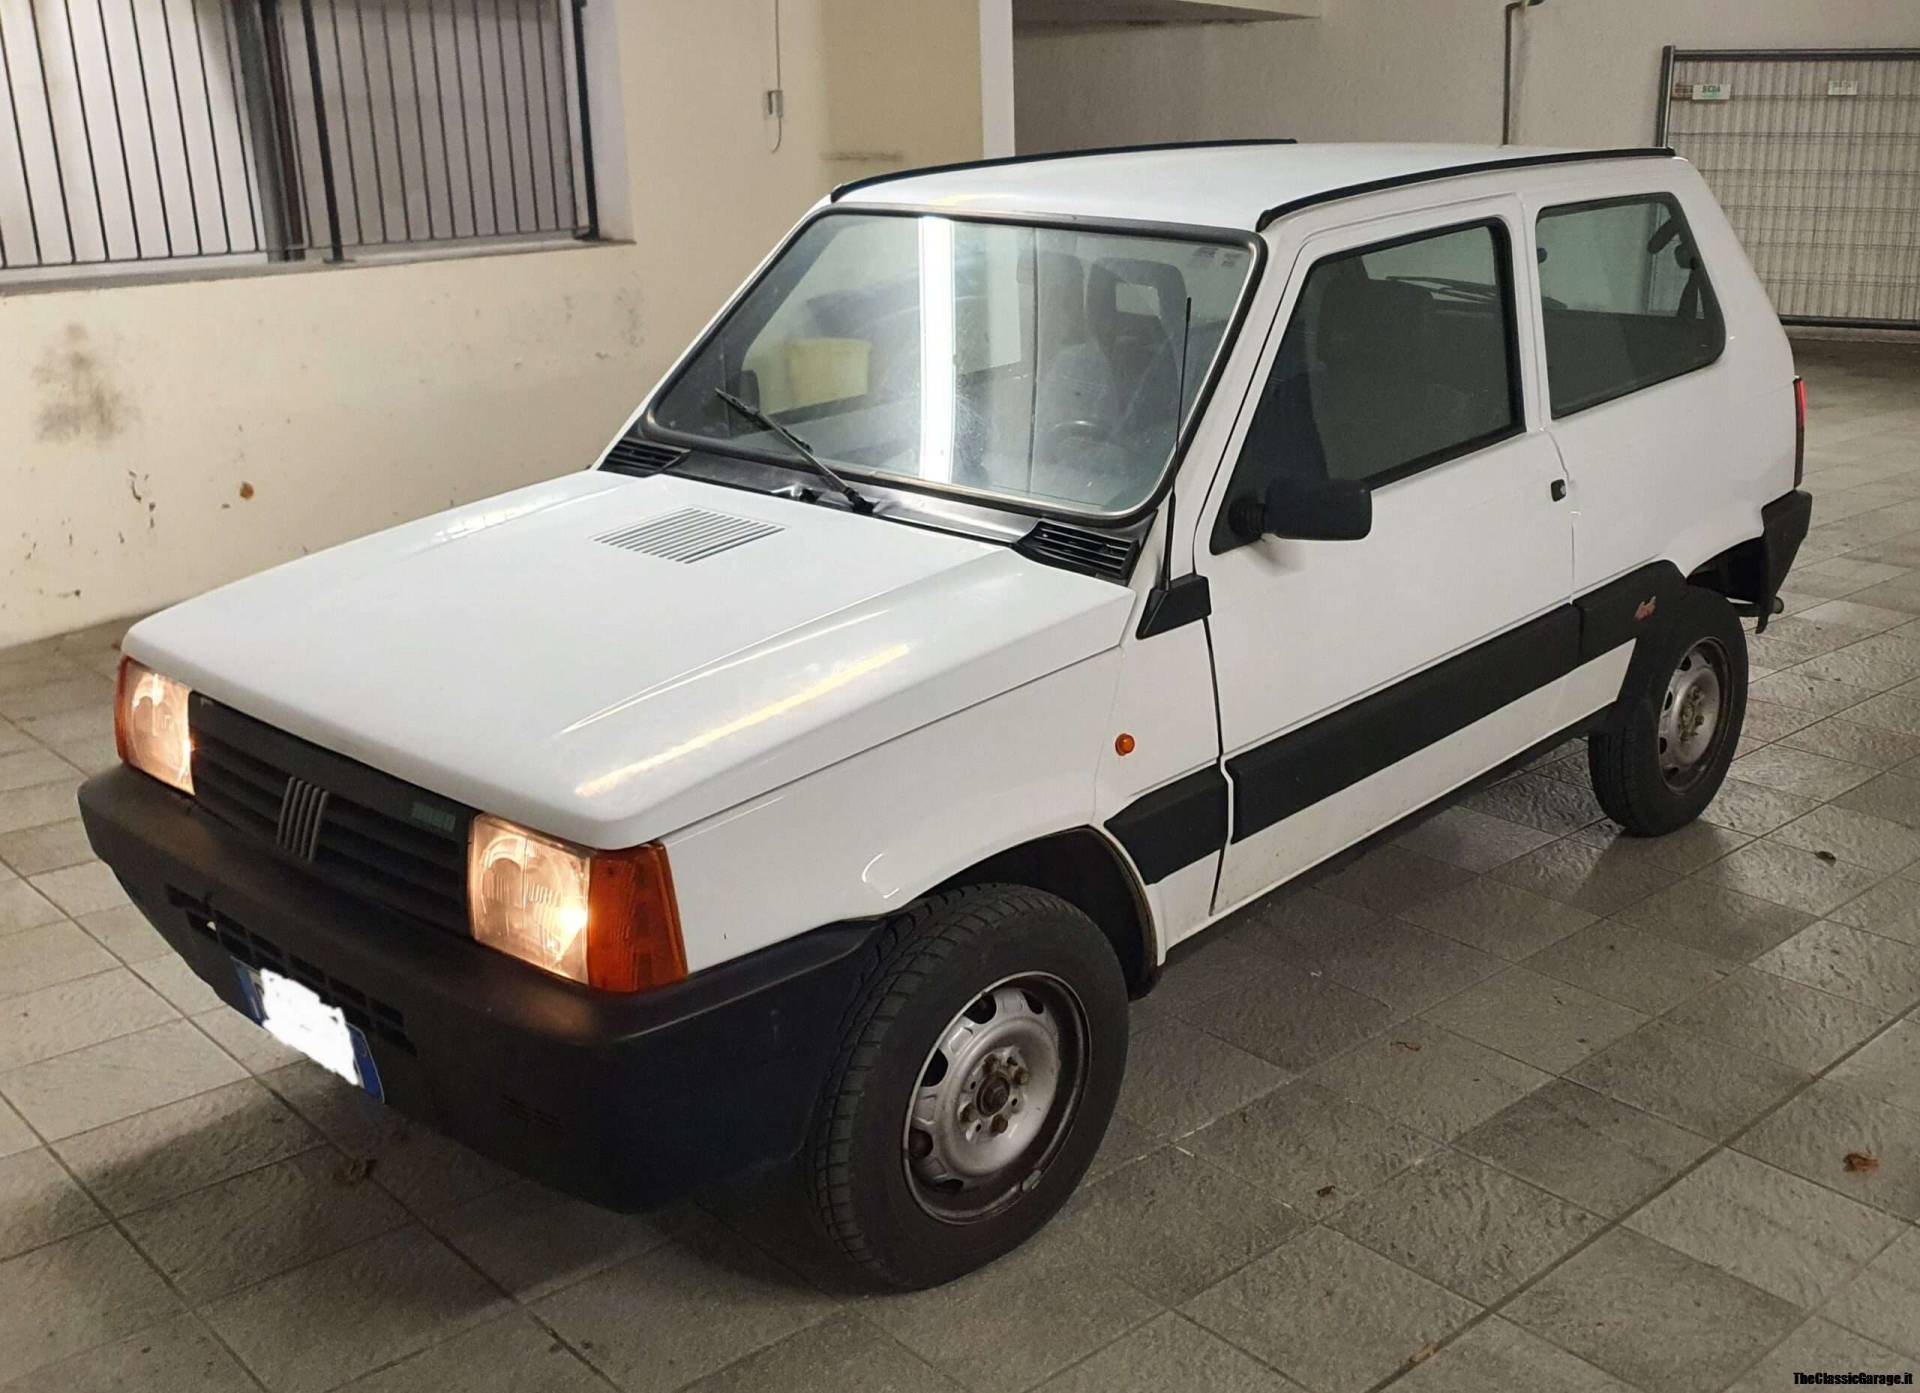 Used Fiat Panda 4x4 Cars For Sale